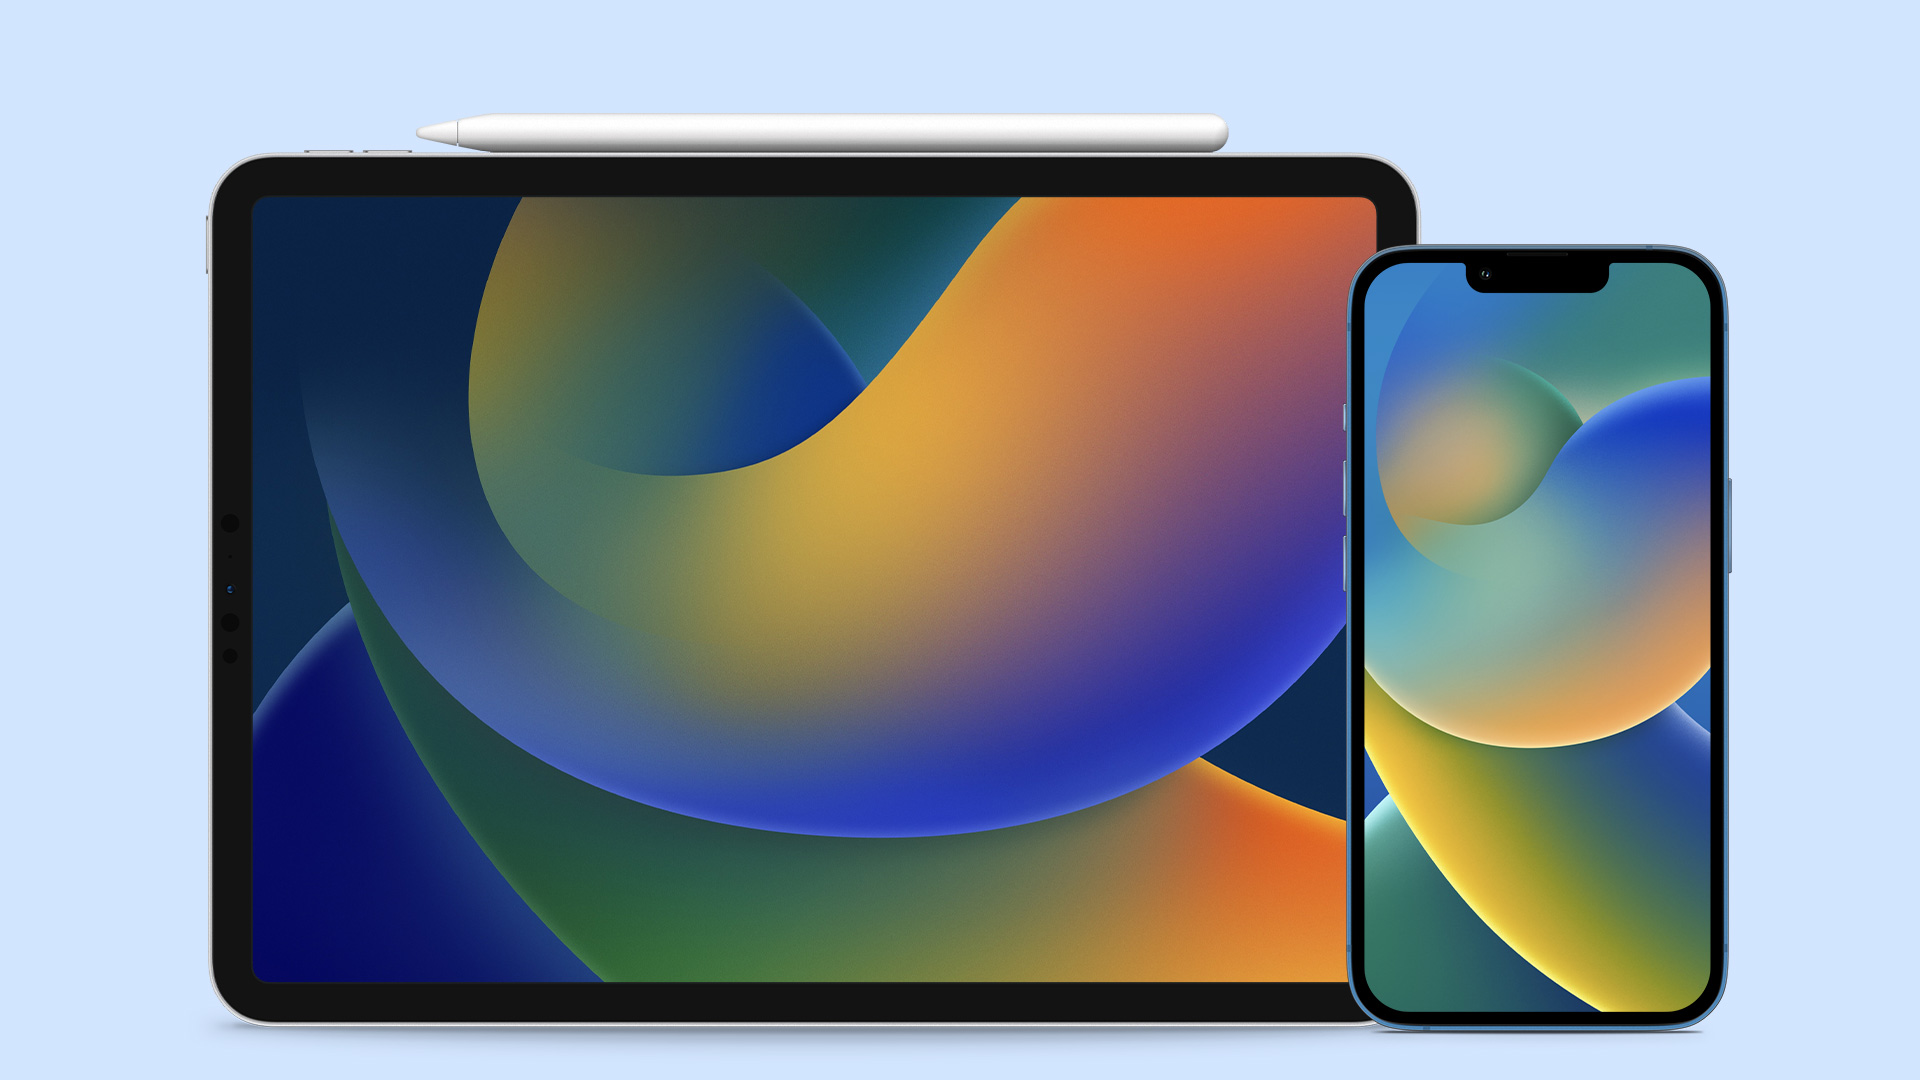 Download iOS 16 Wallpapers and iPadOS 16 Wallpapers - Guiding Tech